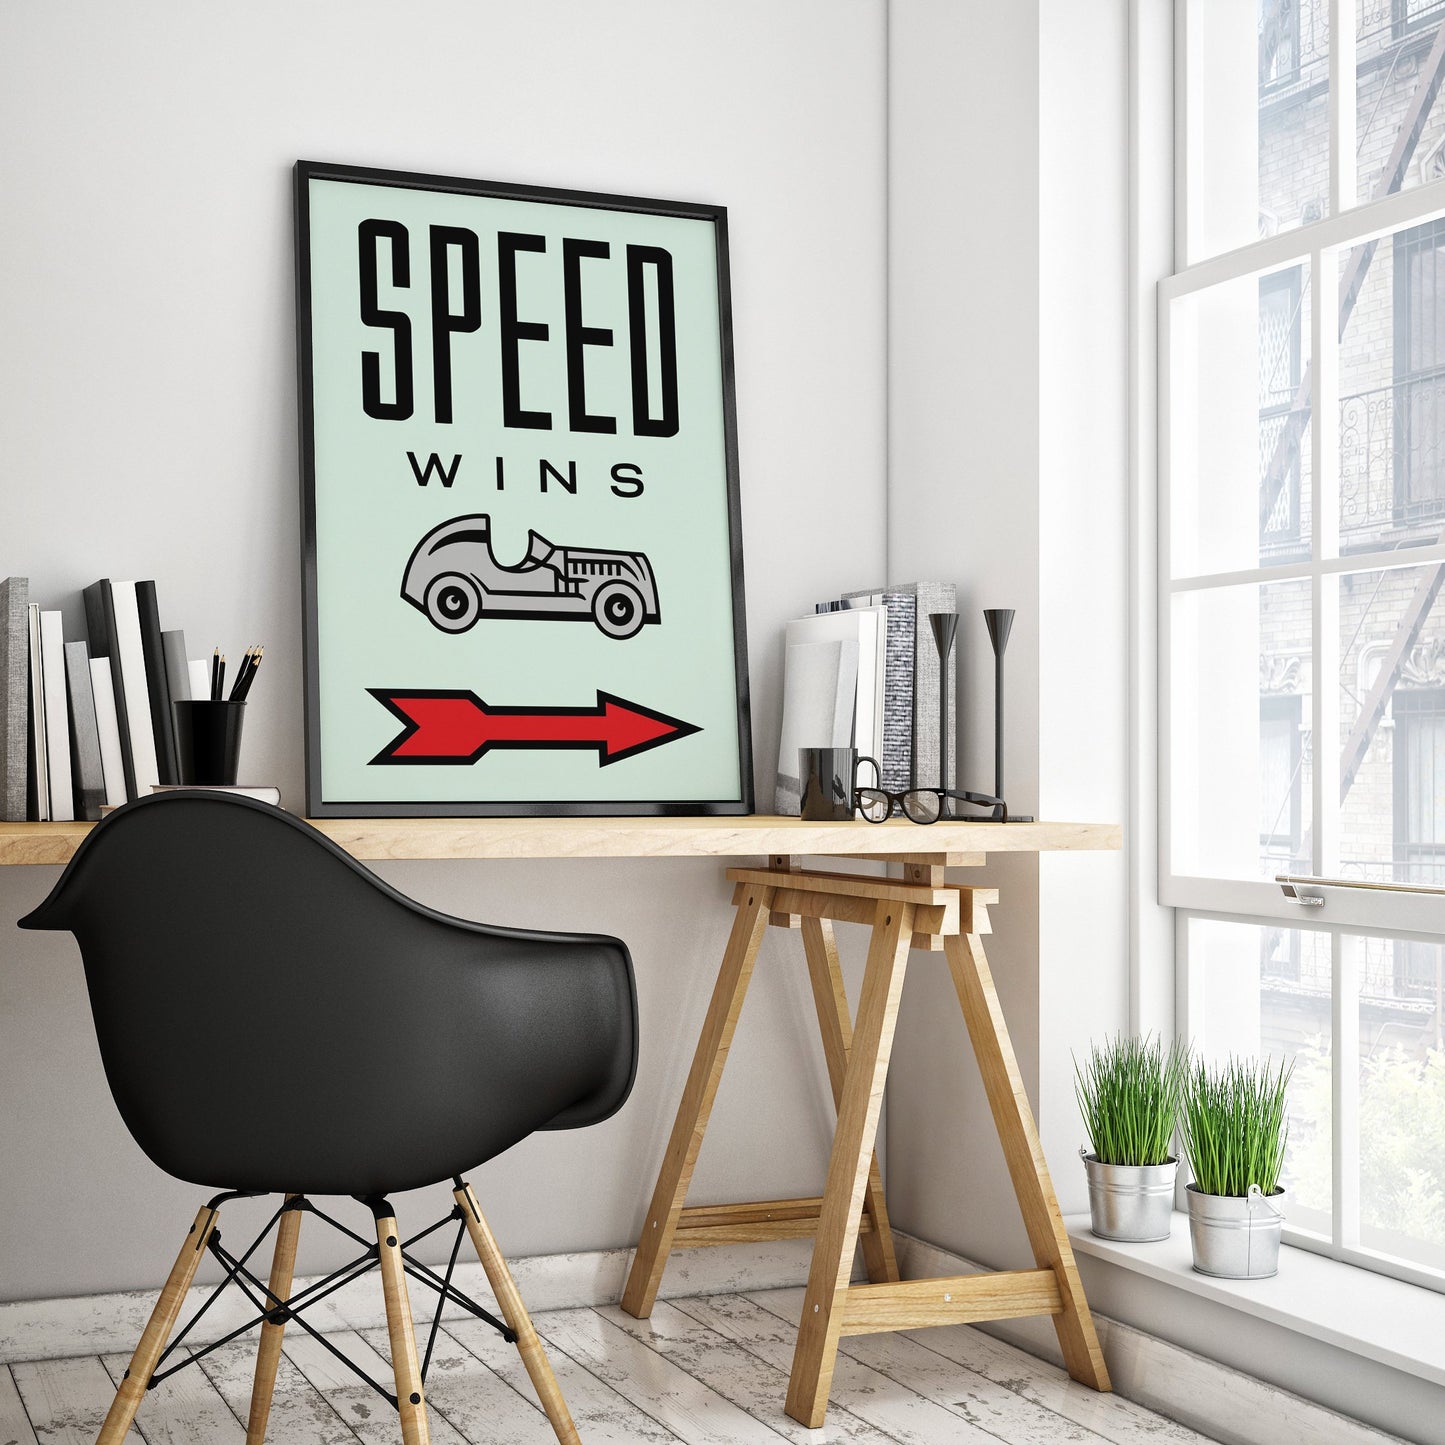 SPEED WINS Motivating Wall Art Poster for Home Office